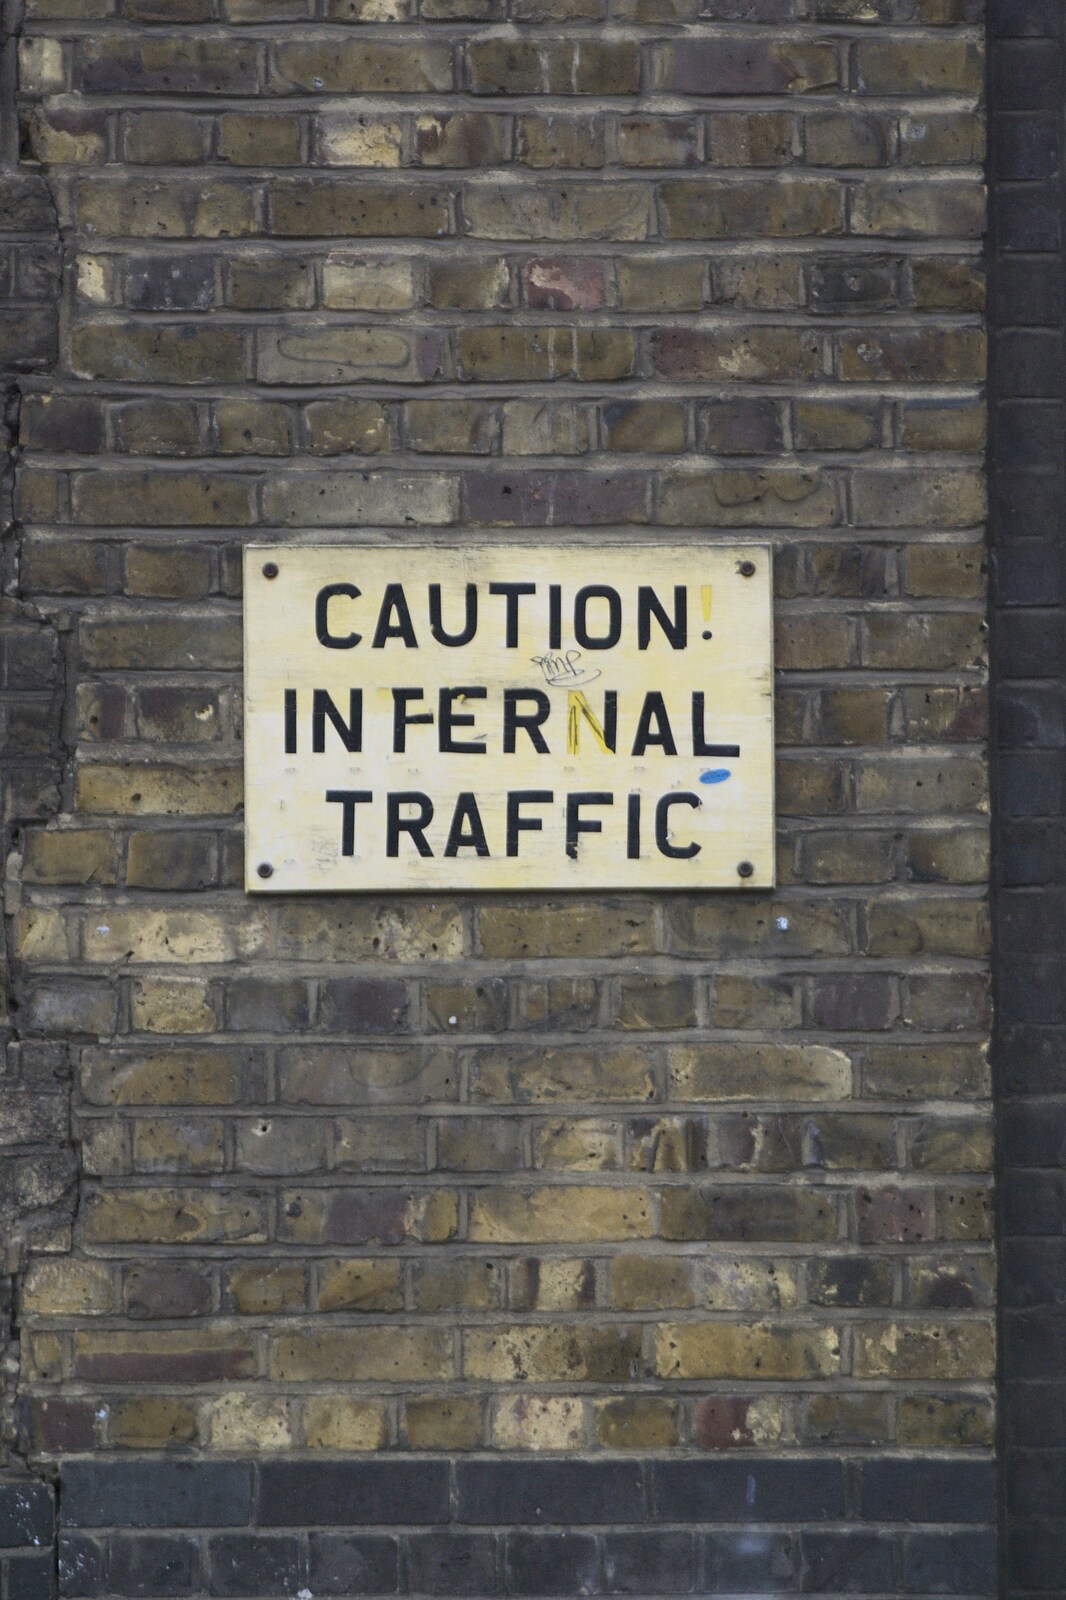 'Caution: infernal traffic' from From East End to East Coast: Brick Lane and Walberswick, London and Suffolk - 9th February 2007